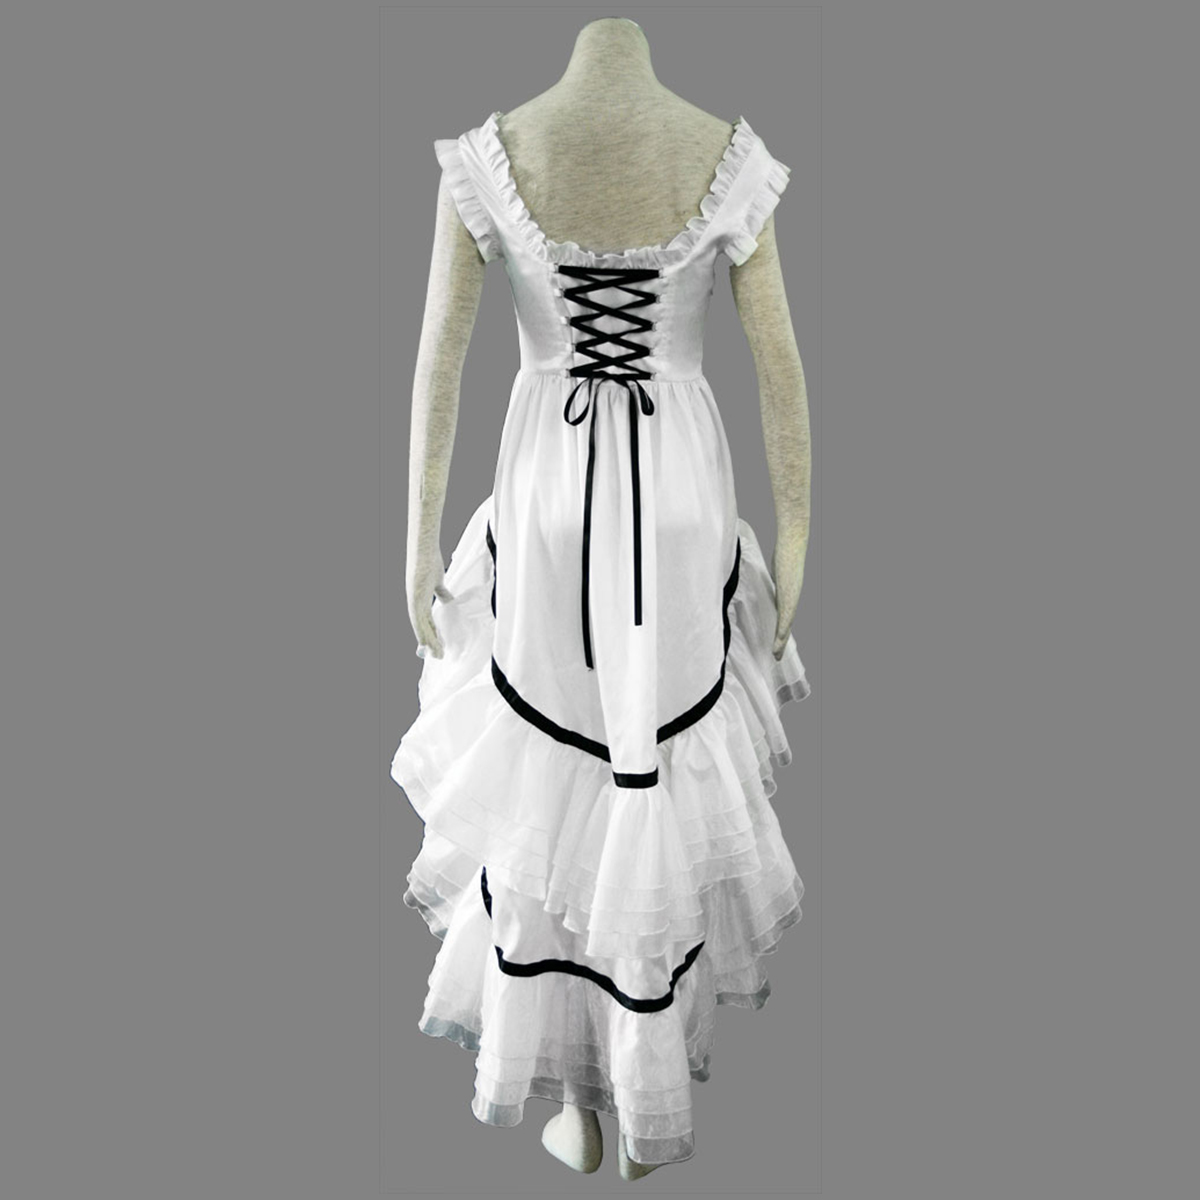 Chobits Eruda 2 White Anime Cosplay Costumes Outfit